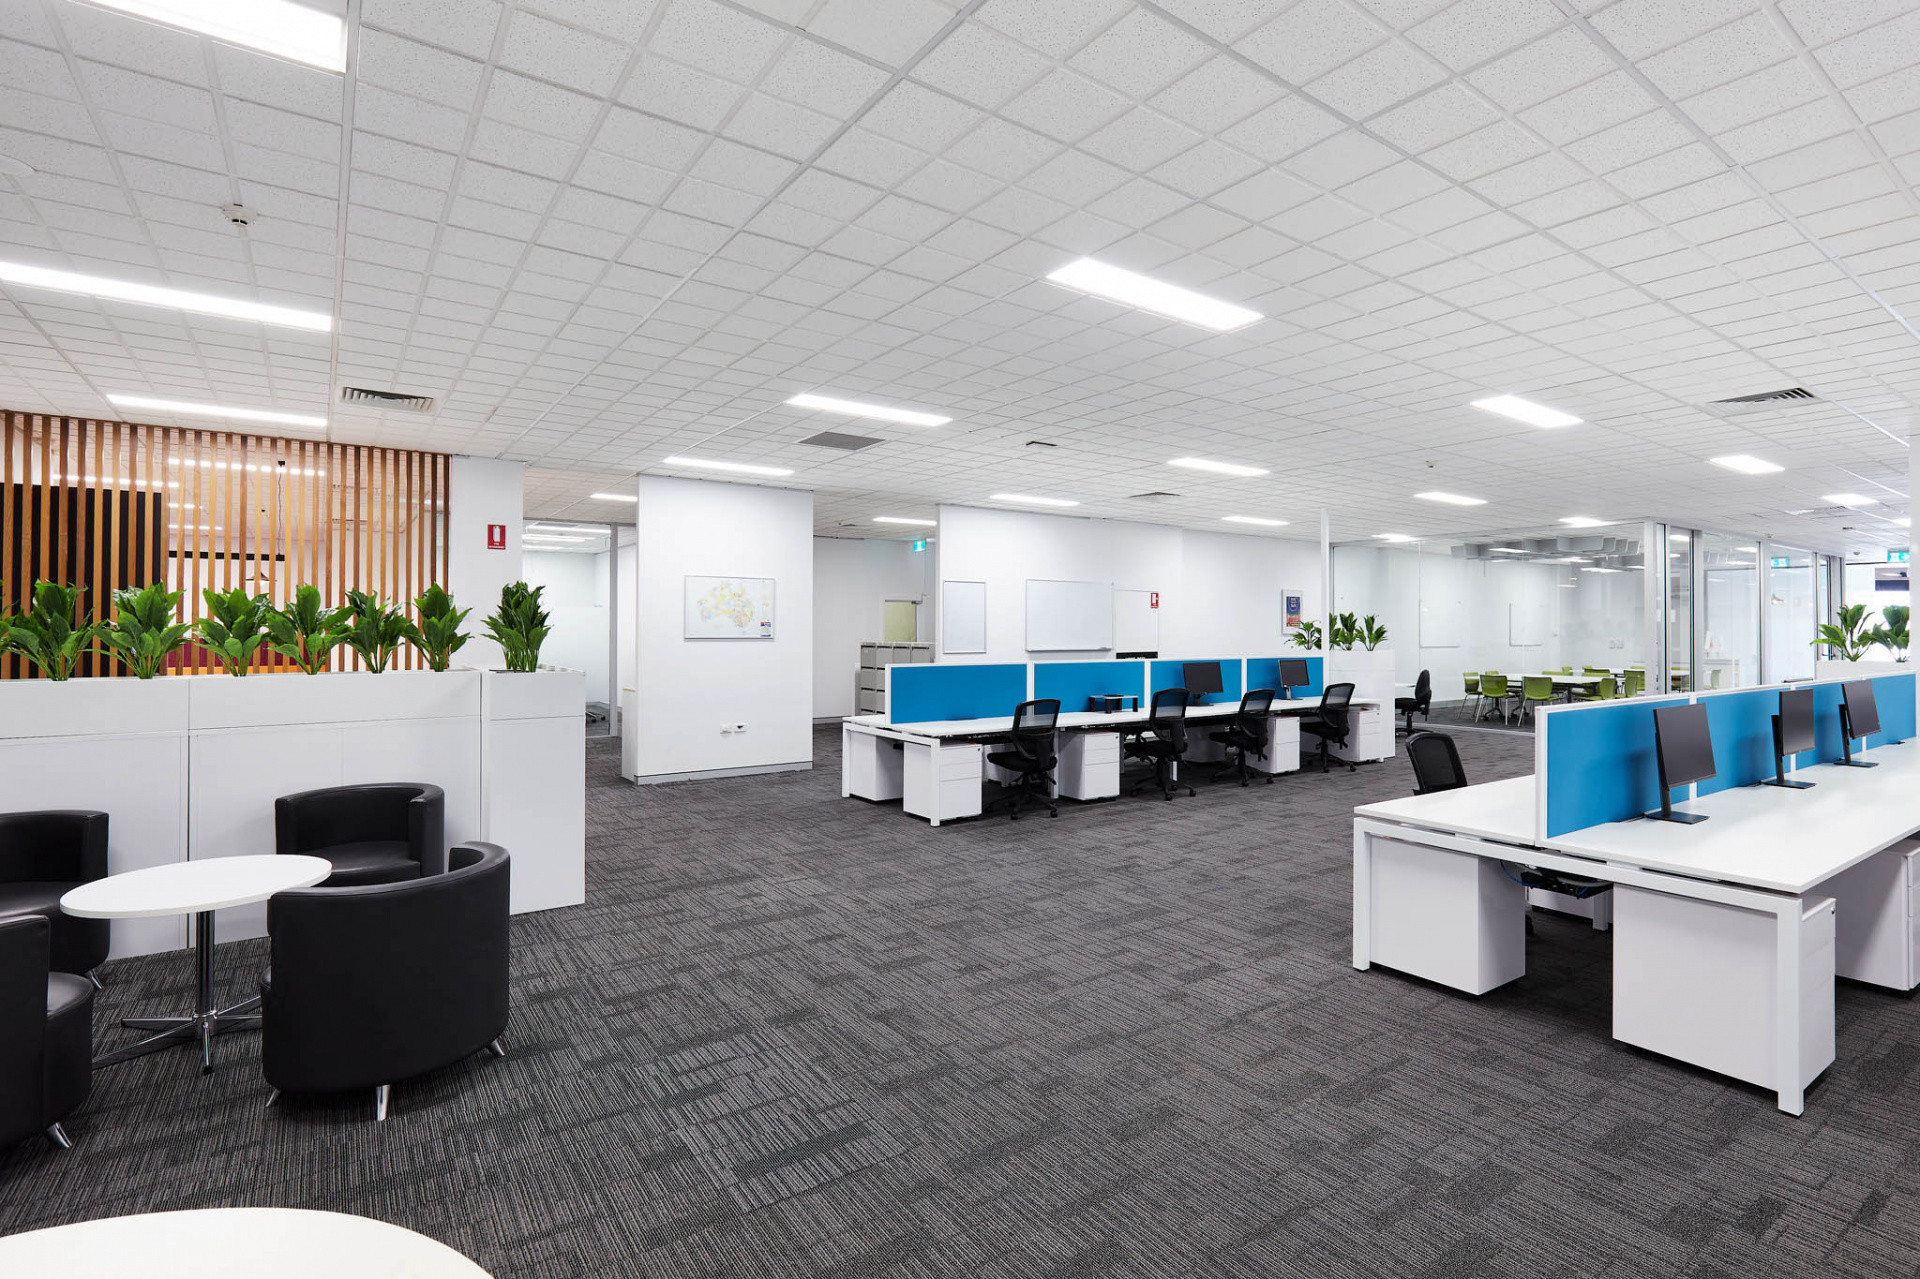  Projects Mann-St Buildingwise-Construction-Newcastle-Mann St-Gosford-Commercial-1625